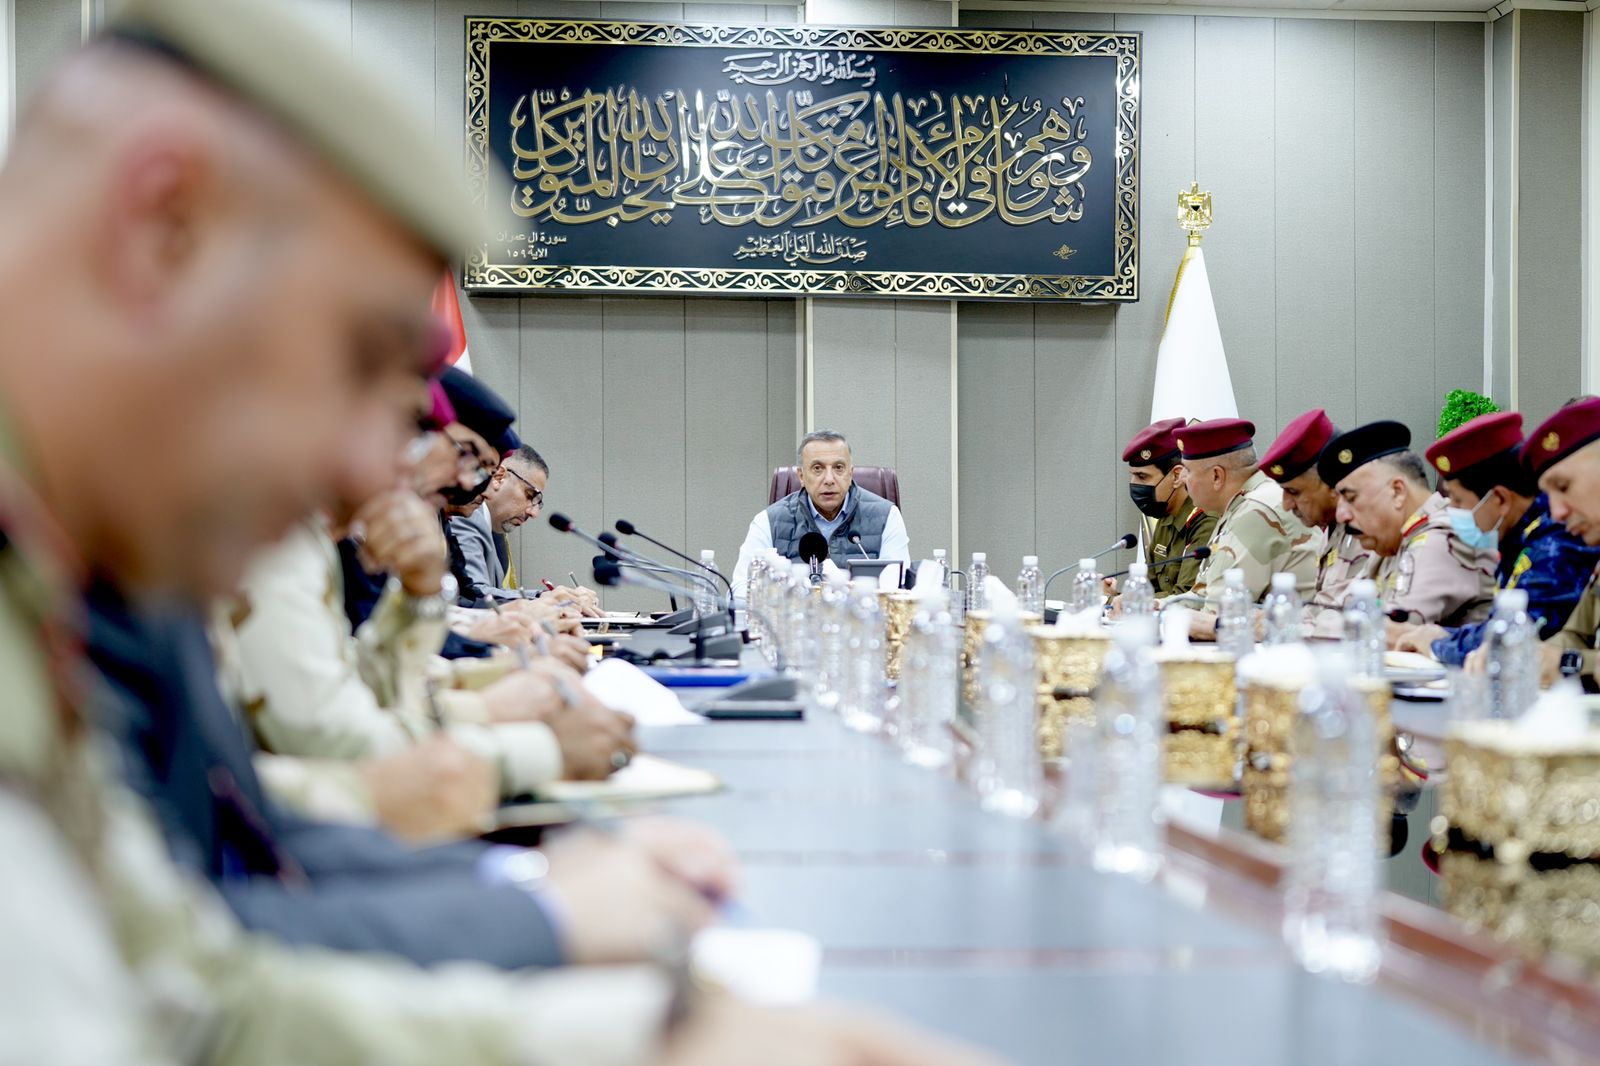 Al-Kadhimi to security leaders: your responsibility is historic